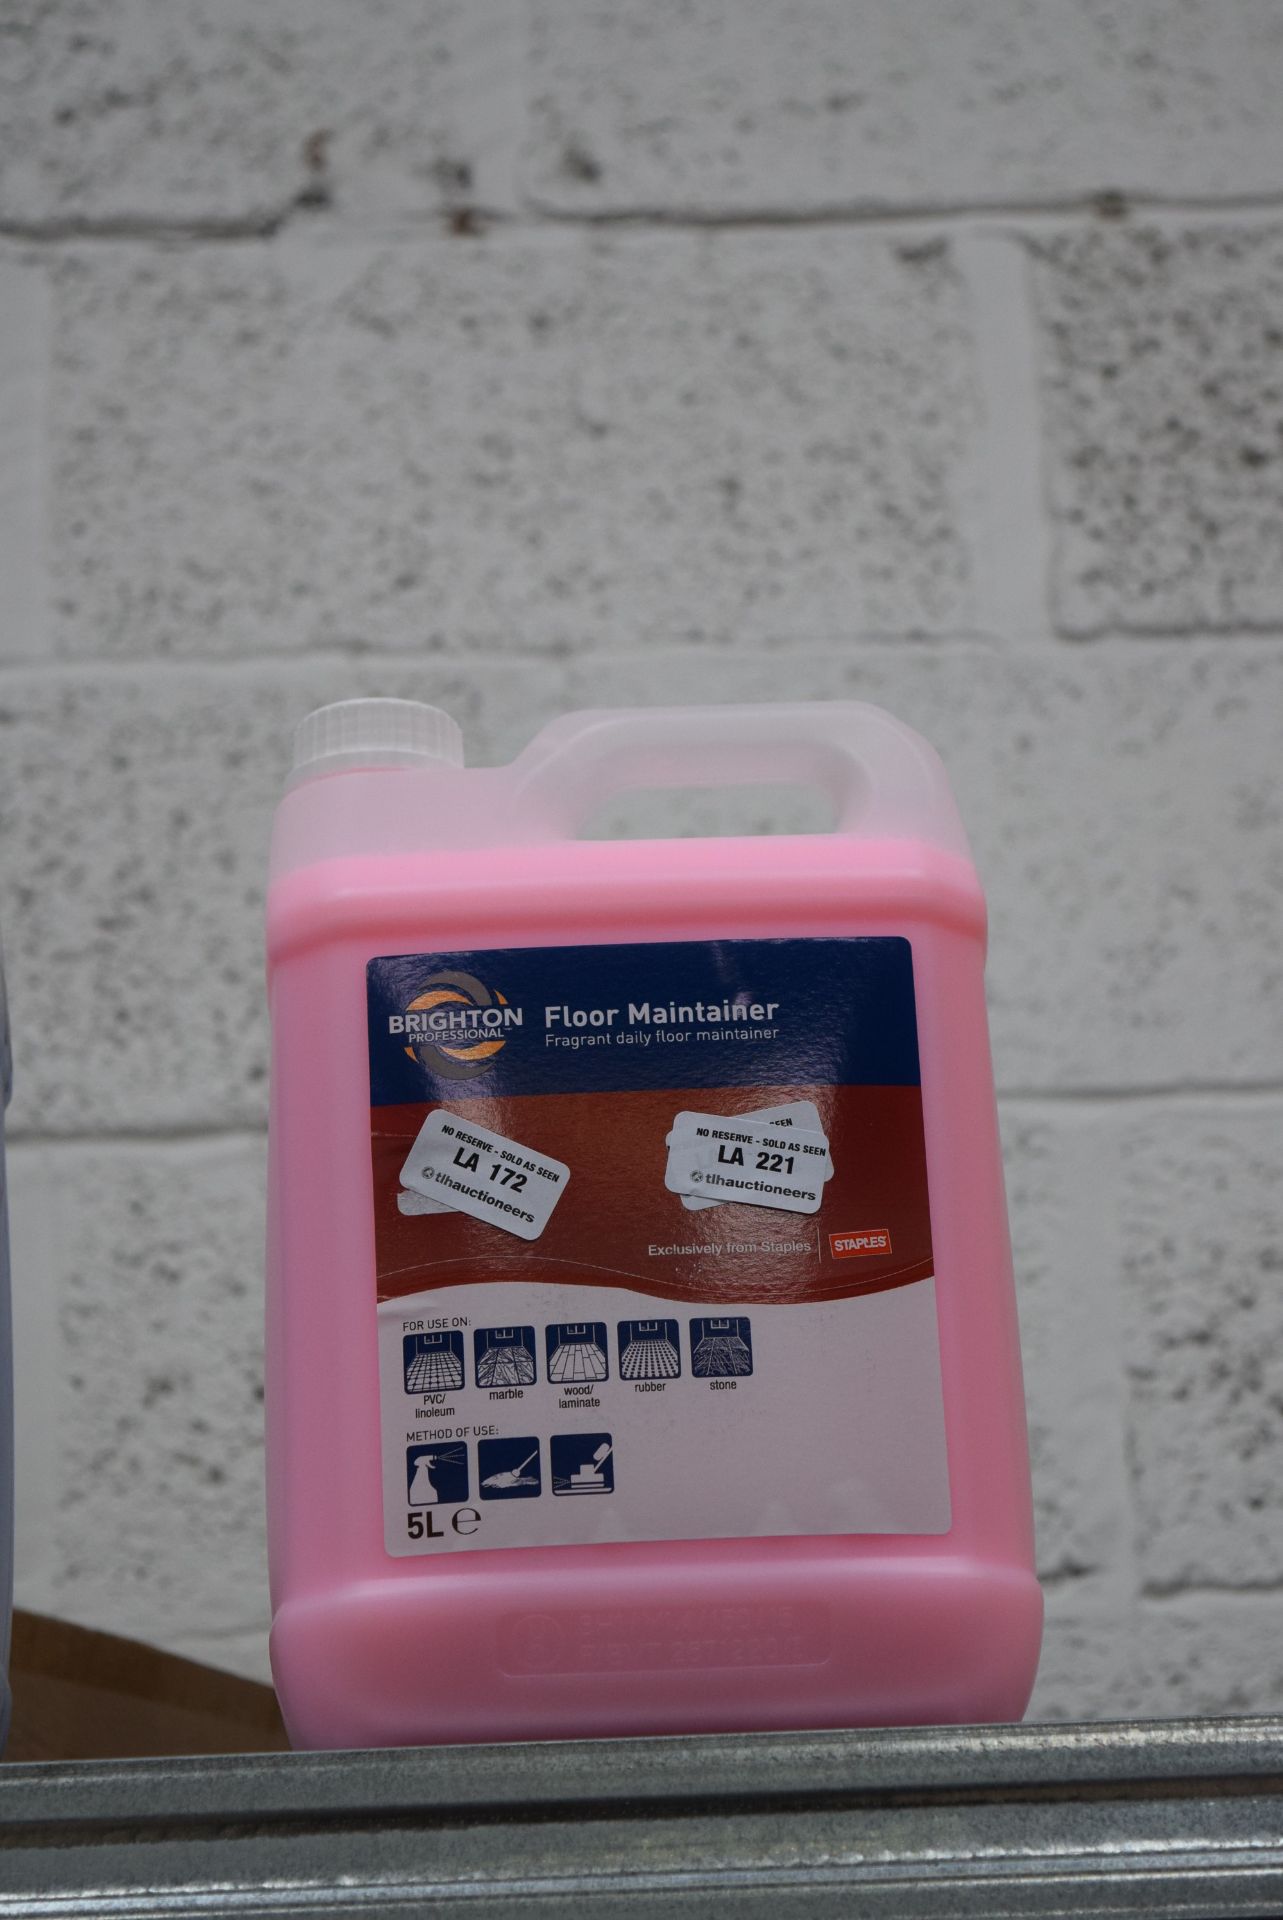 1 X (PINK) 5L BRAND NEW BRIGHTON PROFESSIONAL FLOOR MAINTAINER FRAGRANT DAILY FLOOR MAINTAINER FOR